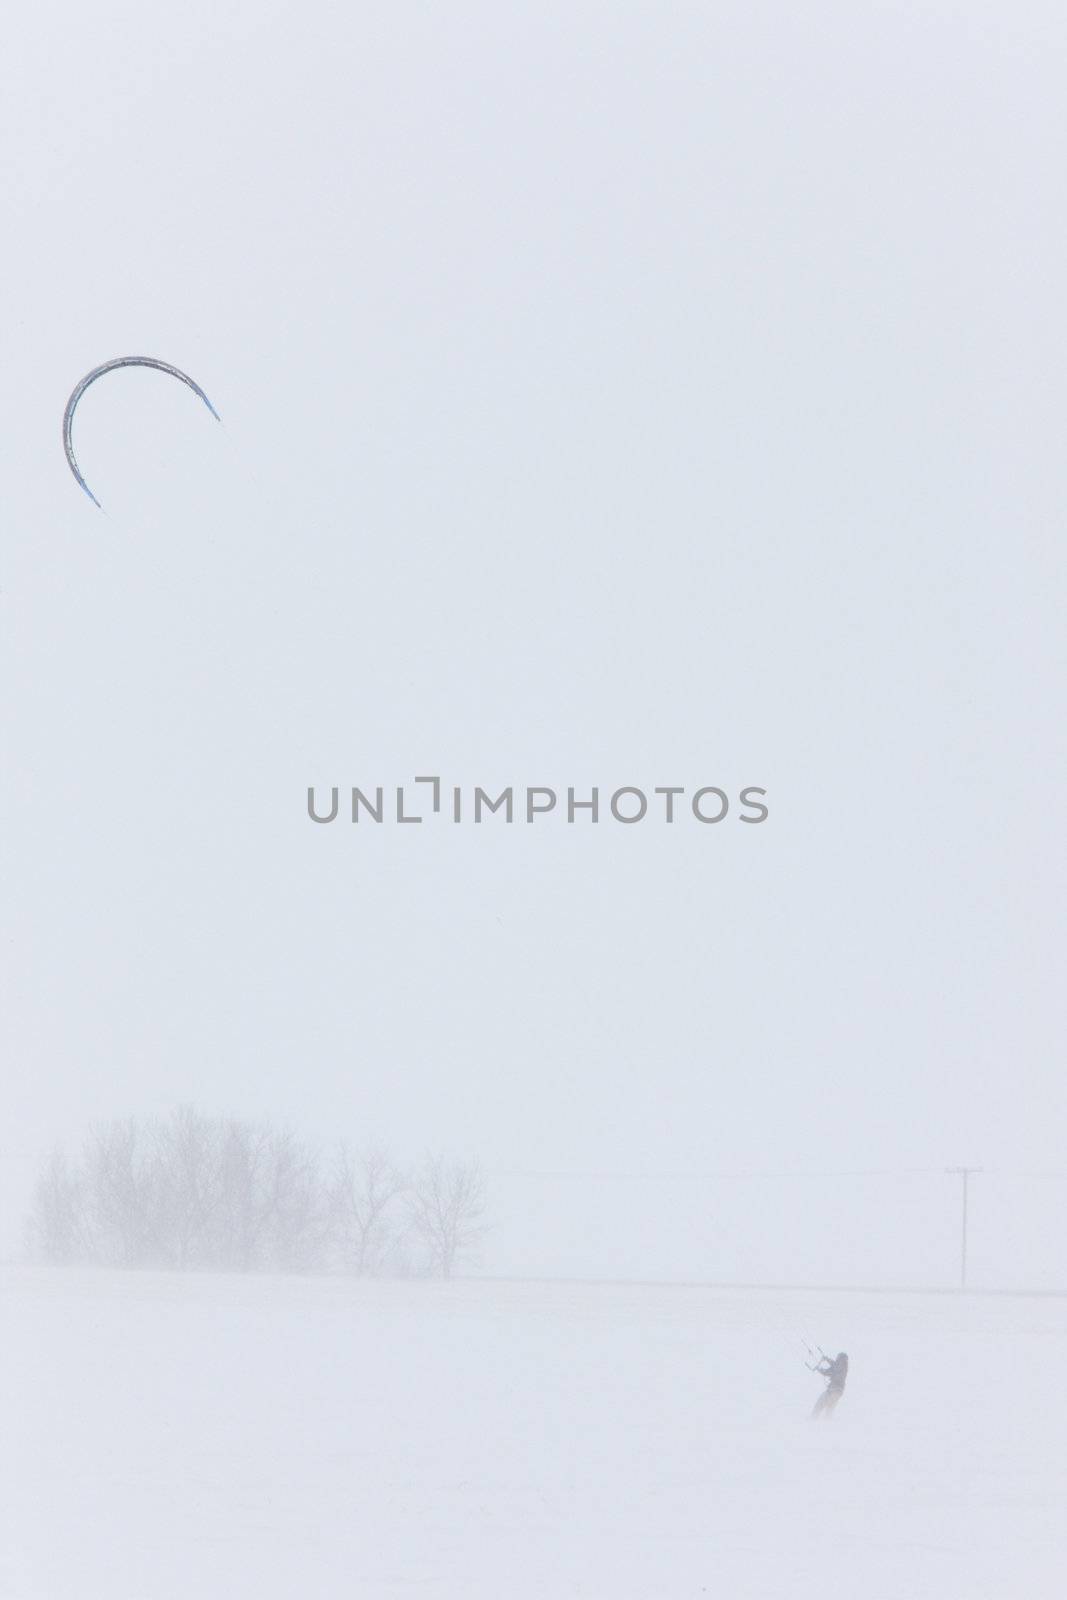 Parachute and Snow Boarding in Blizzard by pictureguy